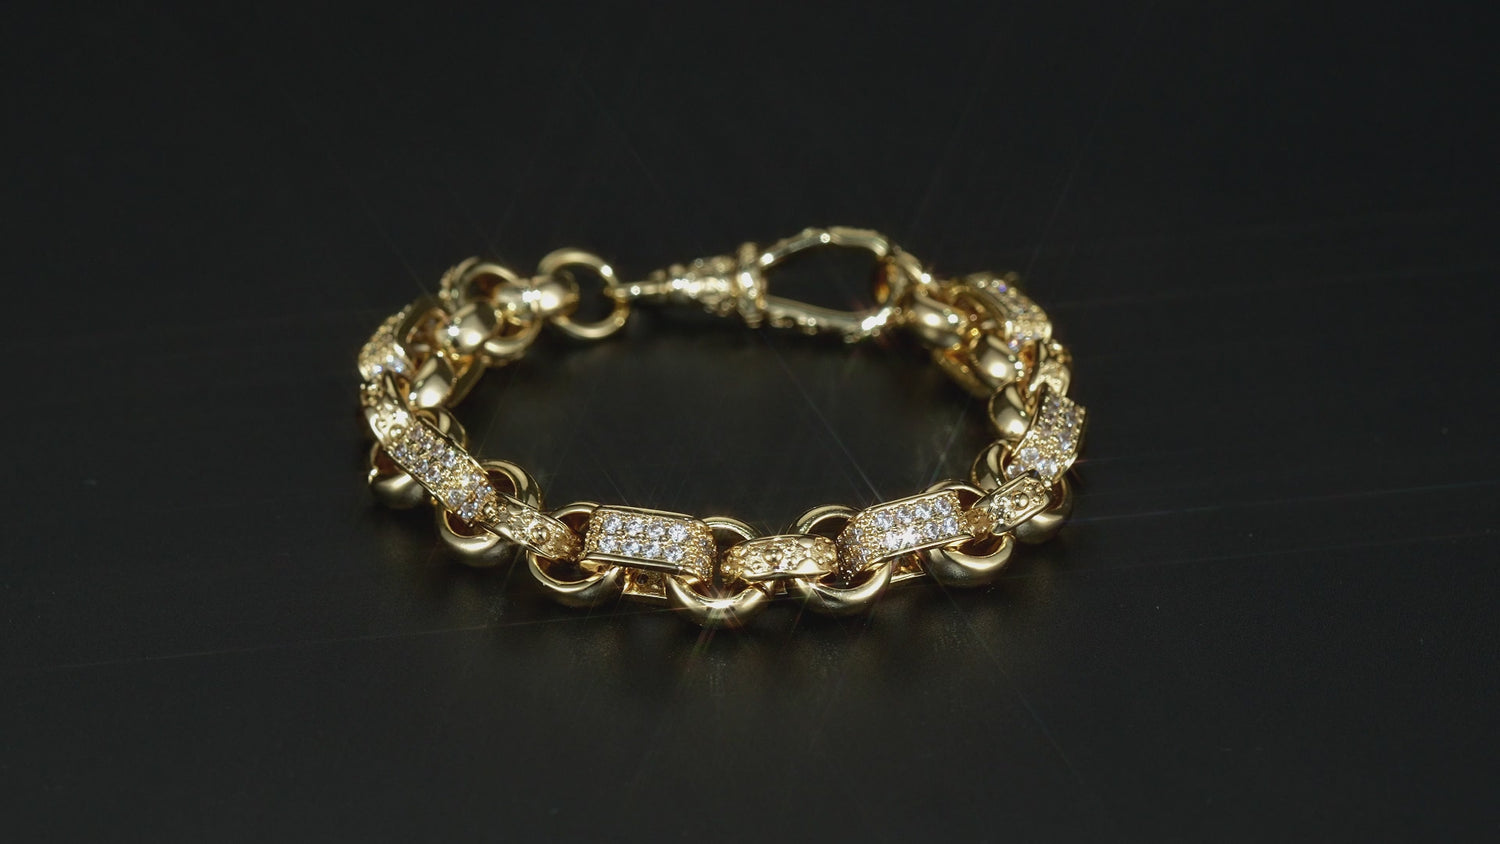 Luxury Gold 10mm Gypsy Link with Stones Belcher Bracelet with Albert Clasp